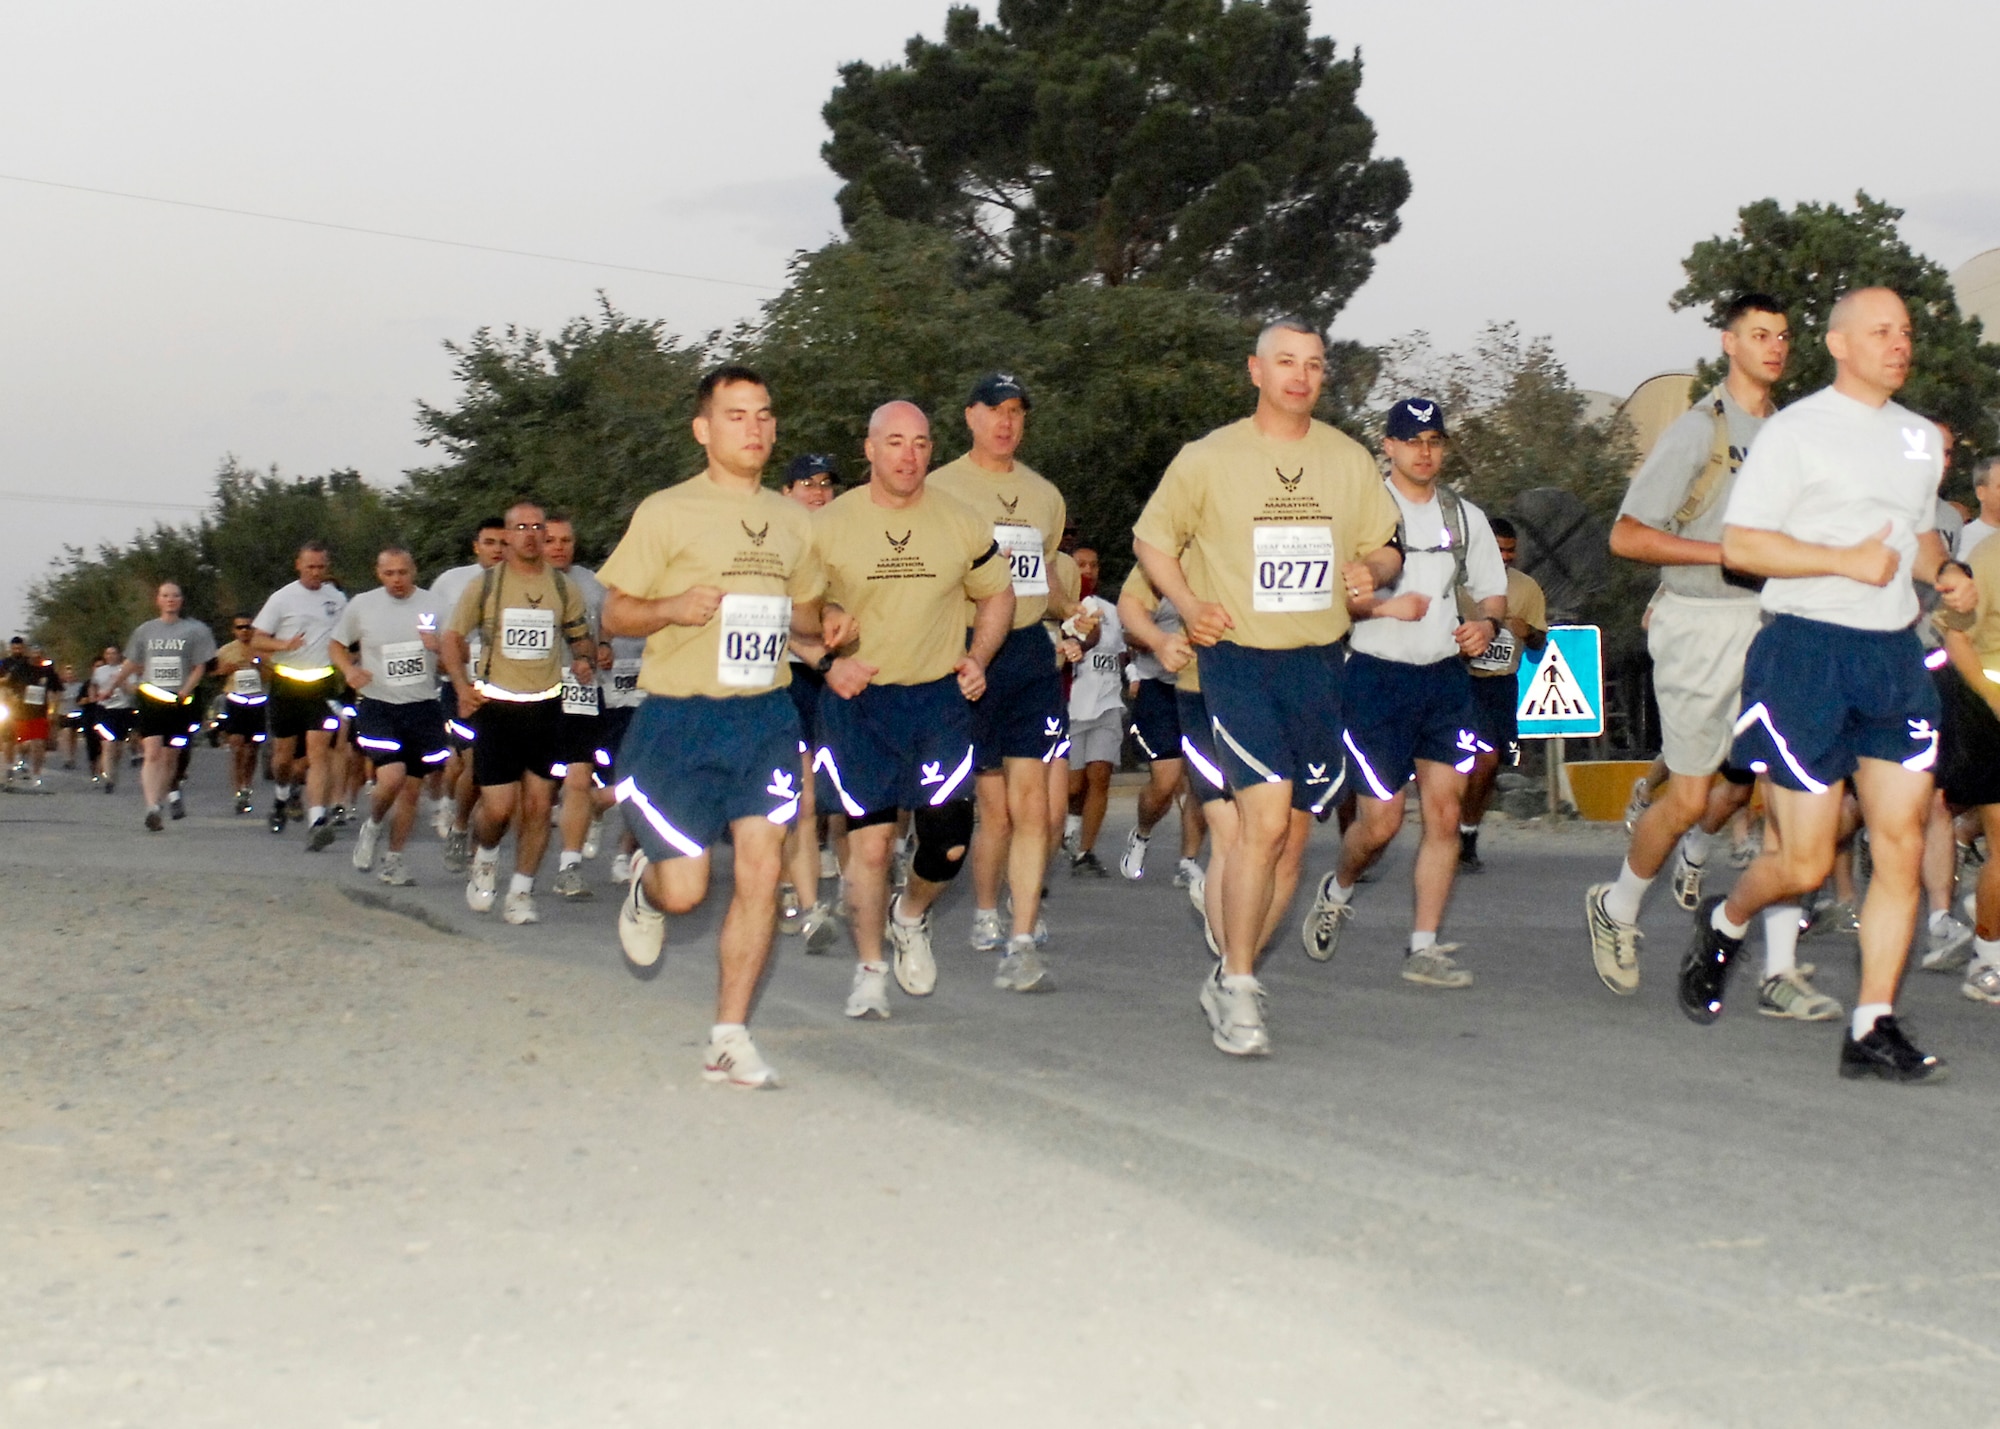 BAGRAM AIRFIELD, Afghanistan -- More 700 Airmen, Soldiers, Sailors and Marines ran in the thirteenth annual Air Force Marathon here, Sept. 13, 2009.  The AF Marathon is held to commemorate our rich history in flight; each year one aircraft is chosen to be highlighted during the marathon and on the unique finisher's medal presented to each race participant.  This year each participant's medal featured a RQ-4 Global Hawk.  (U.S. Air Force photo/Senior Airman Felicia Juenke)